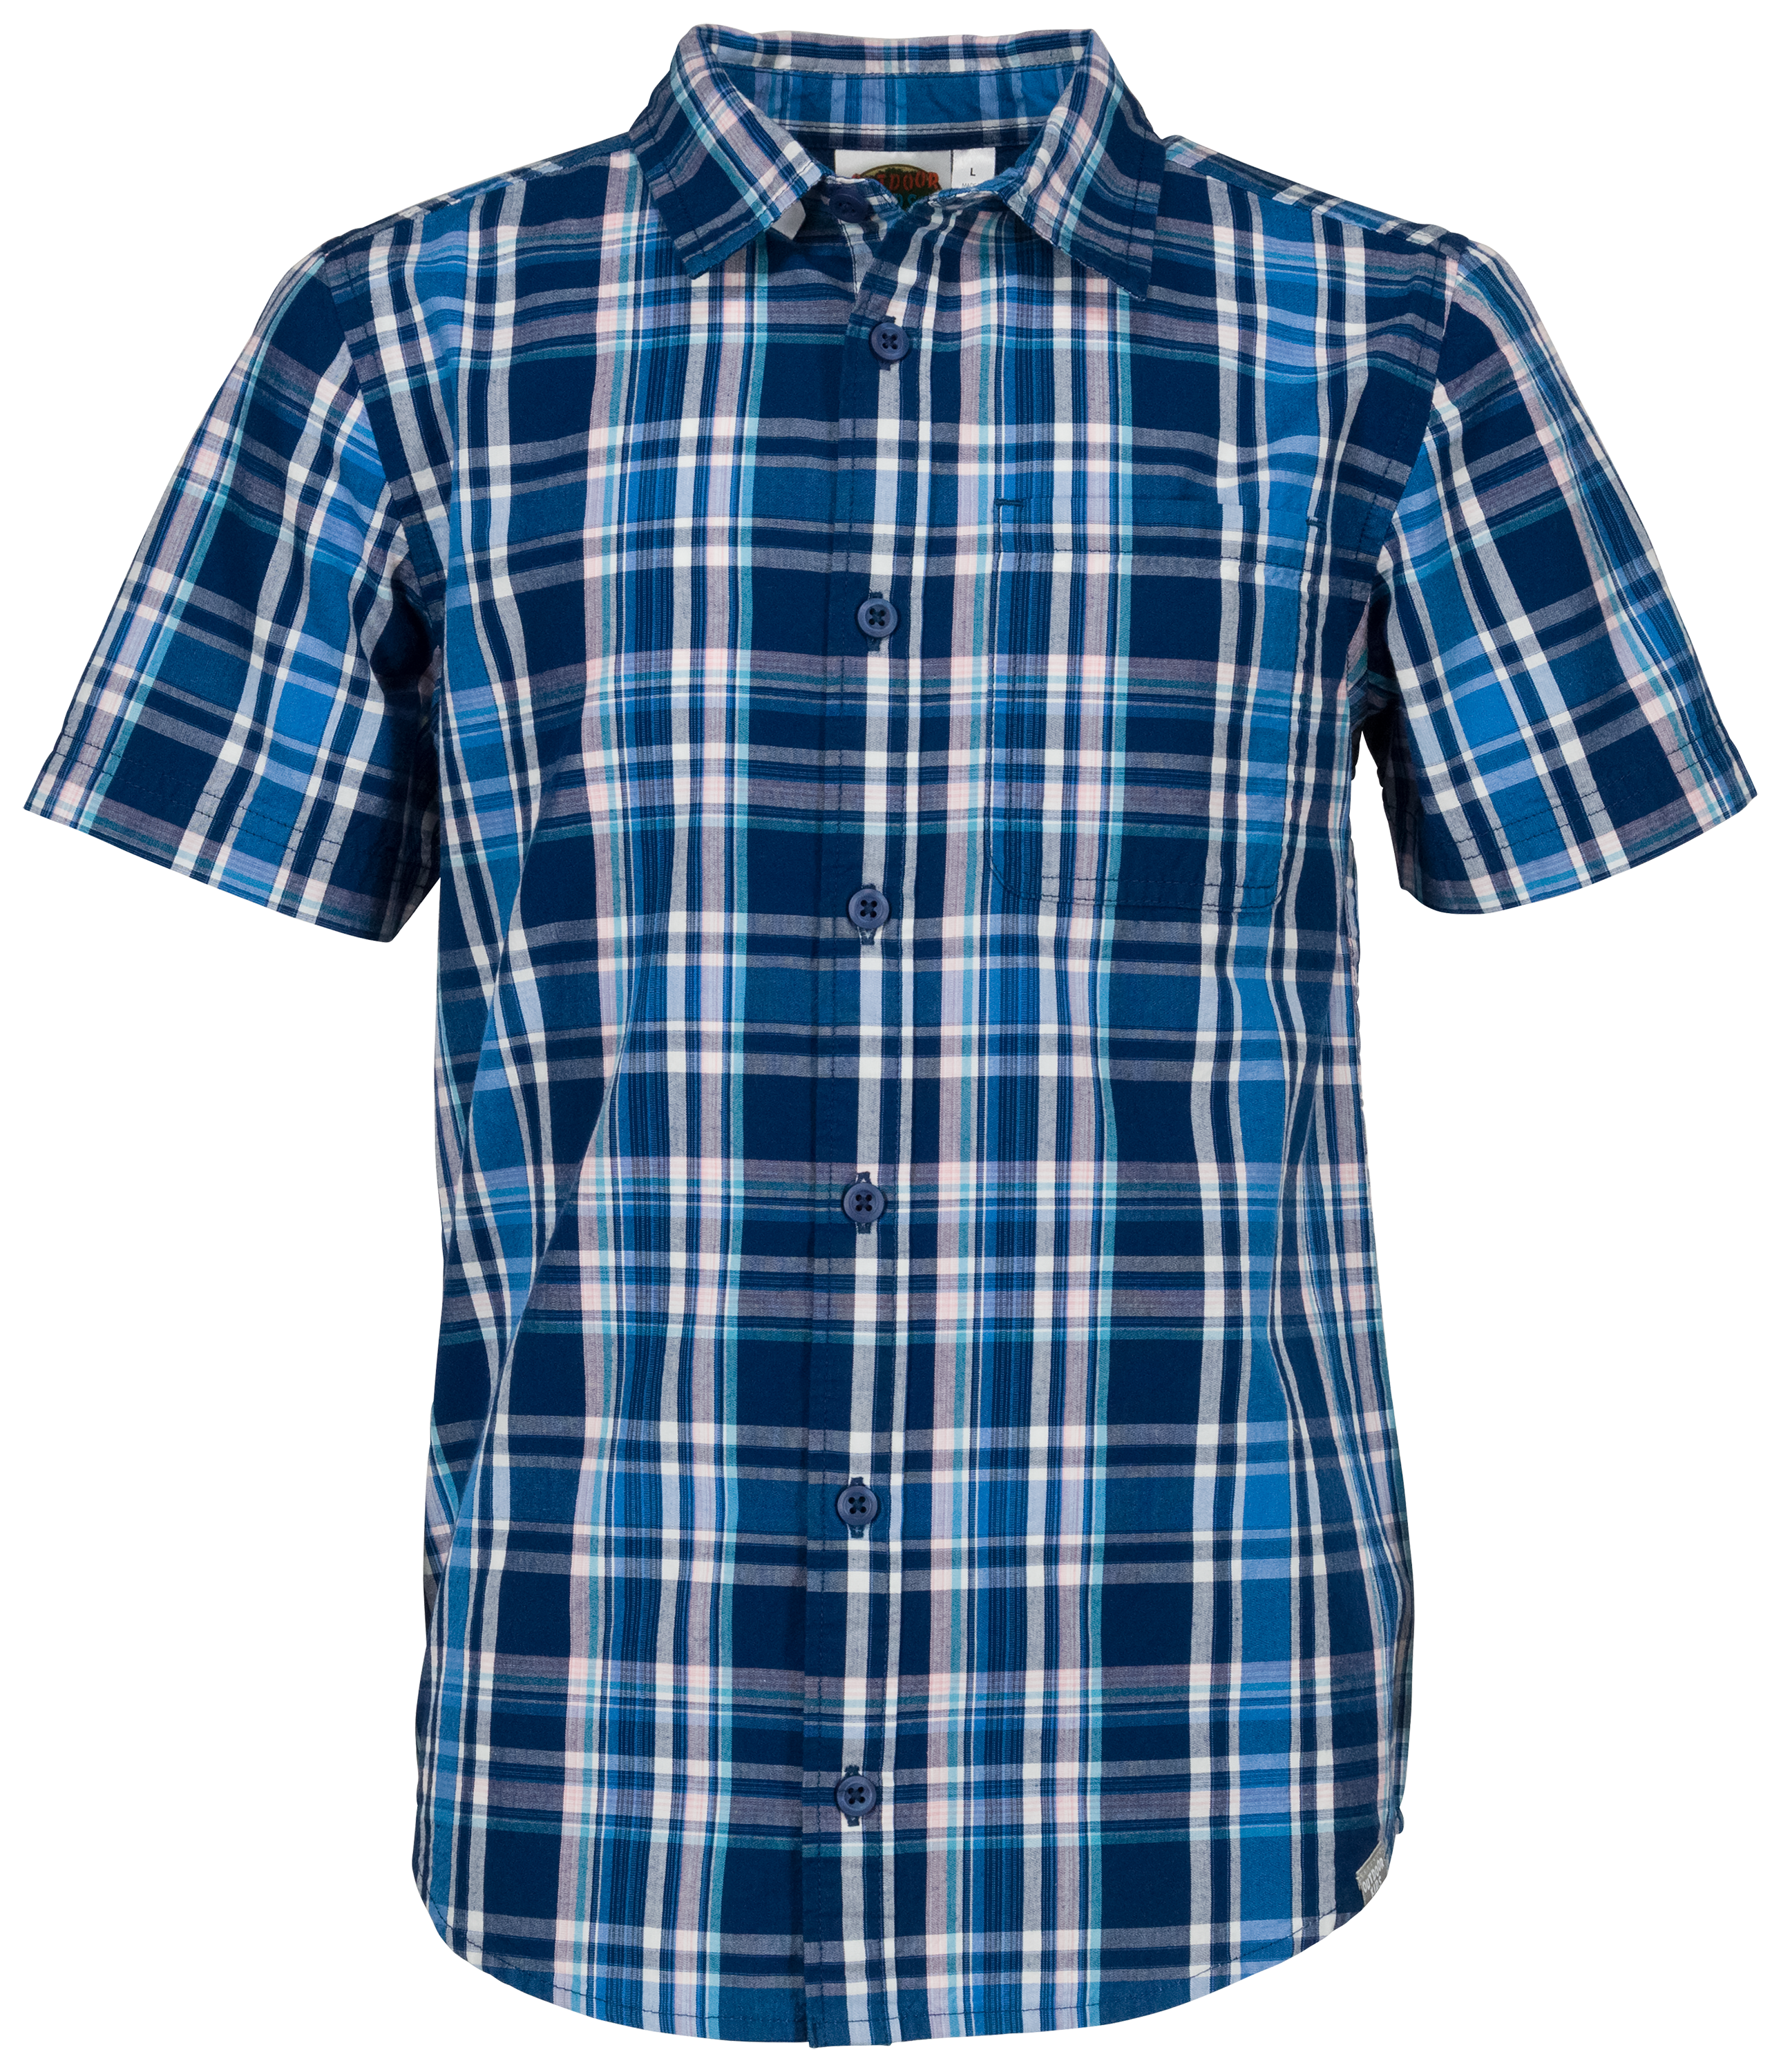 Bass Pro Shops Plaid Button-Down Short-Sleeve Shirt for Toddlers or ...